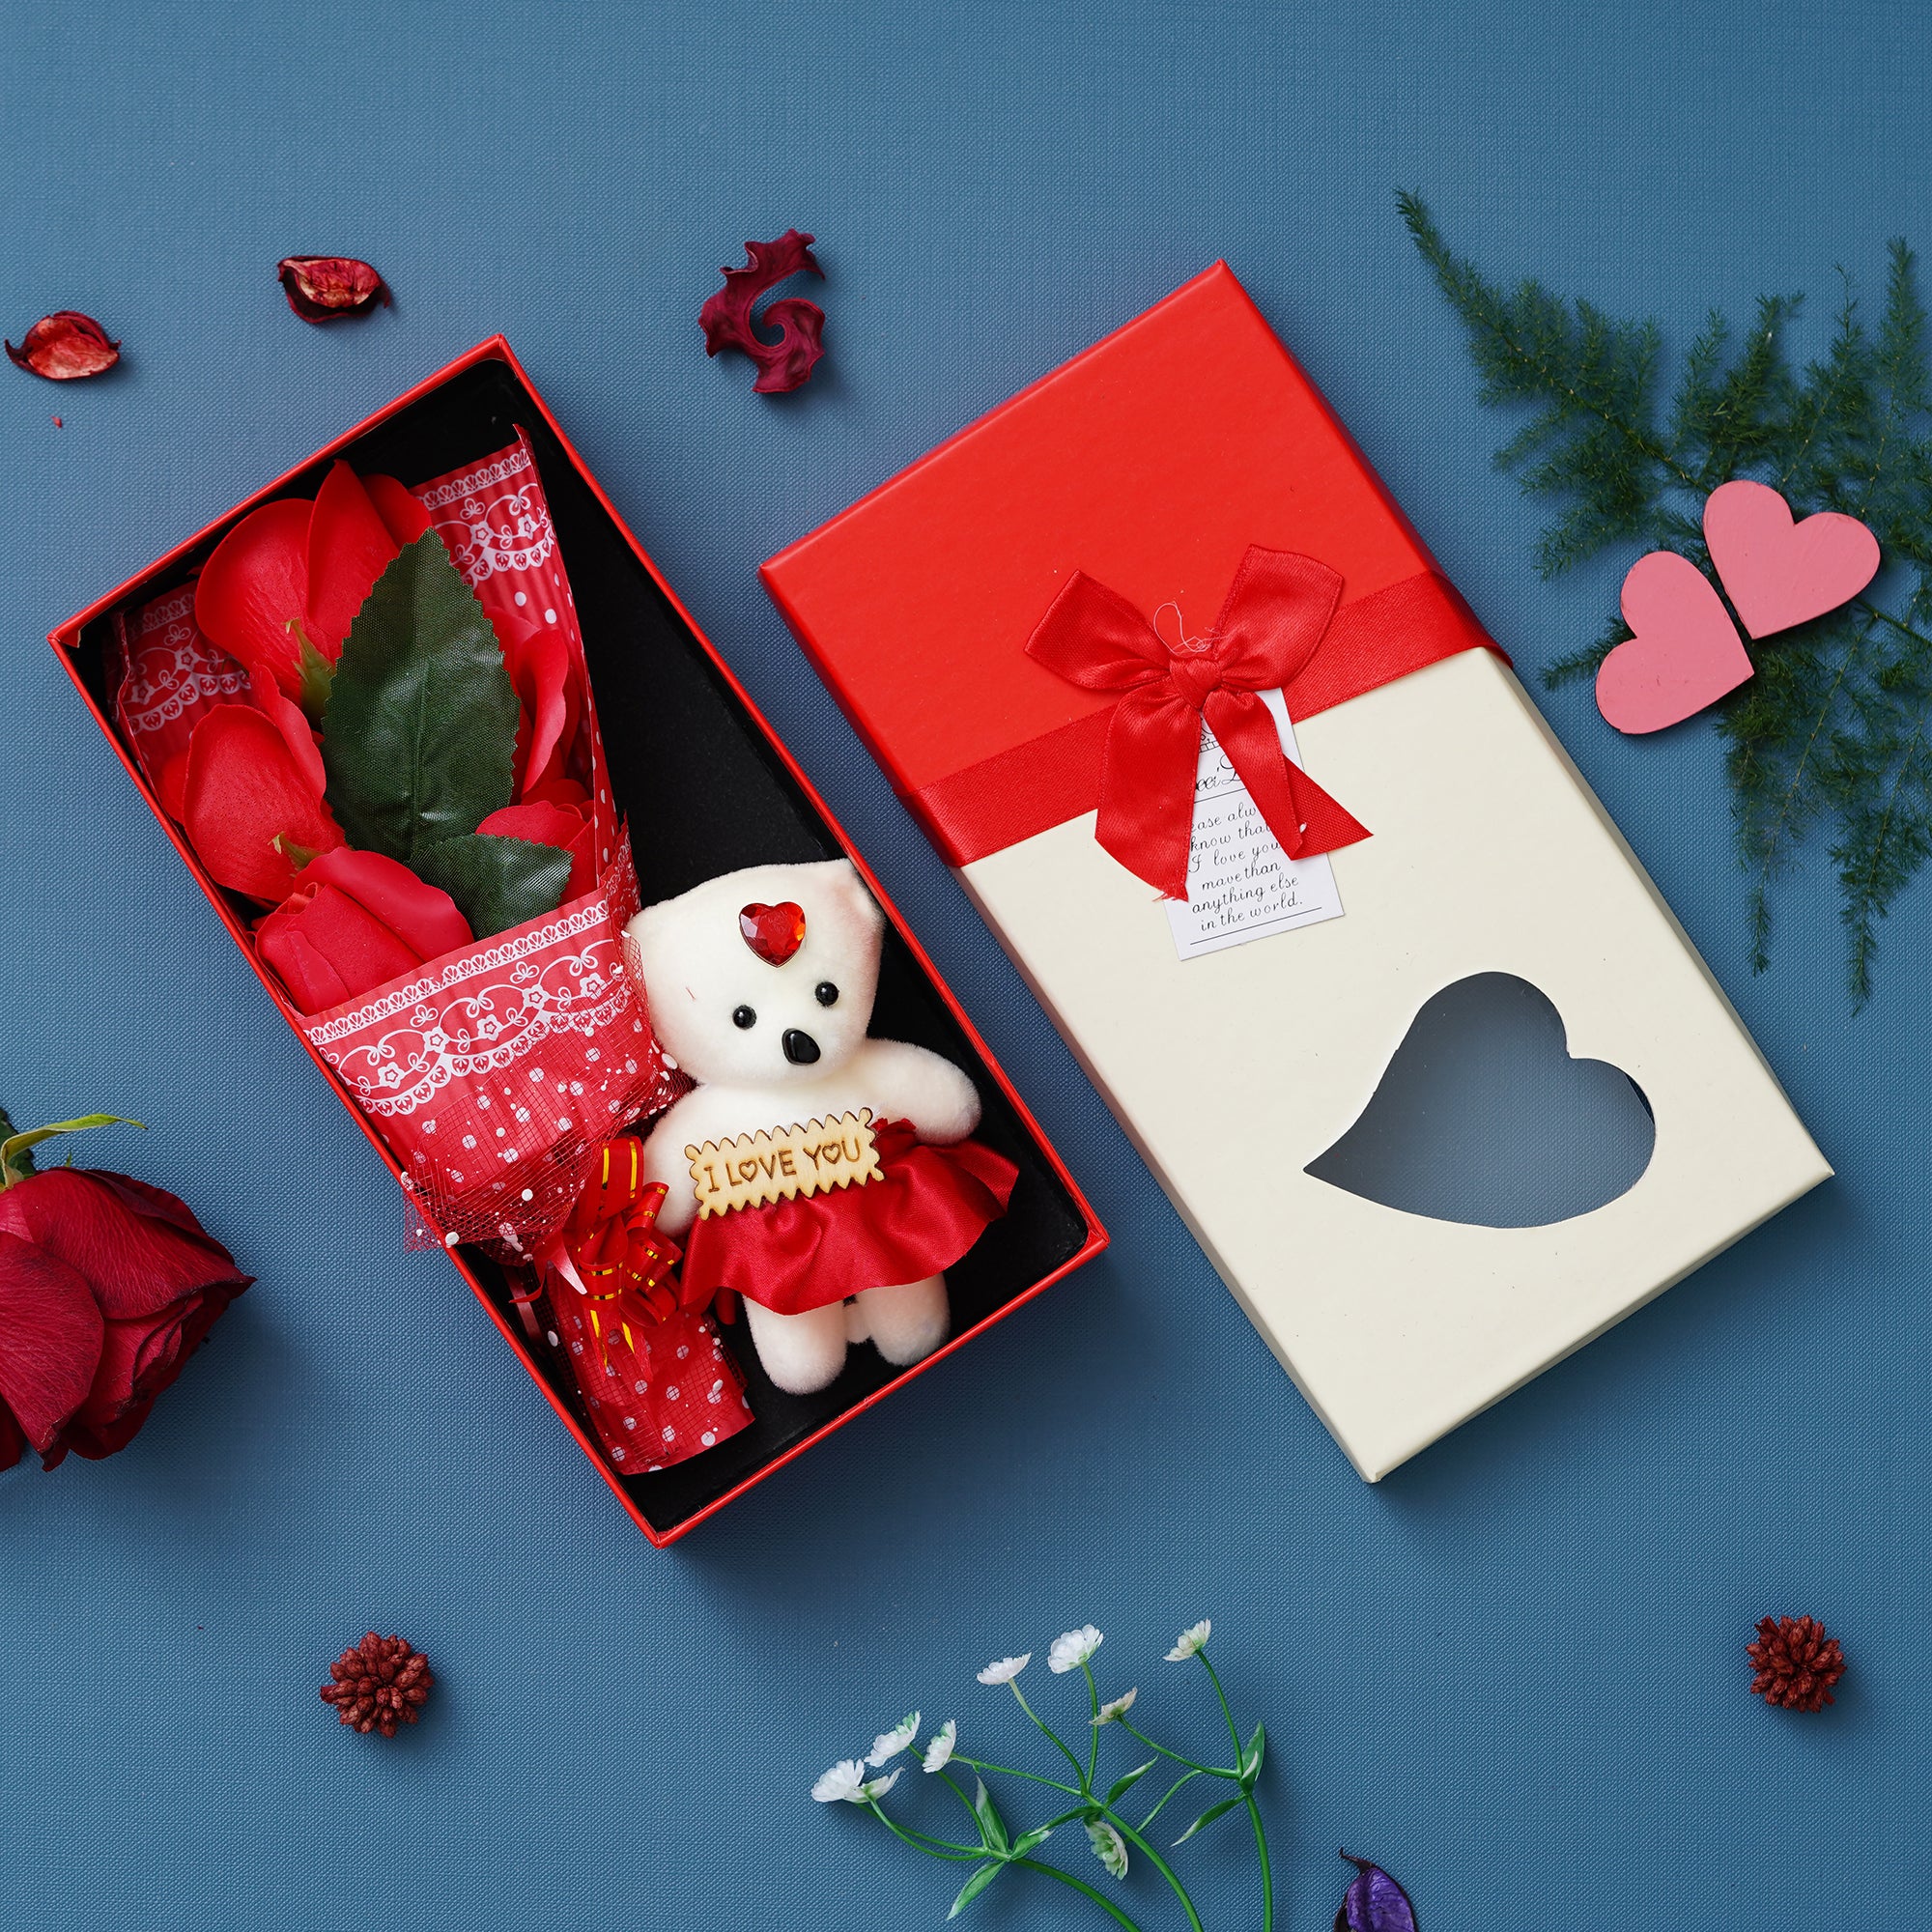 Red Roses Bouqet with White & Red Teddy Bear Valentine's Square Shaped Gift Box